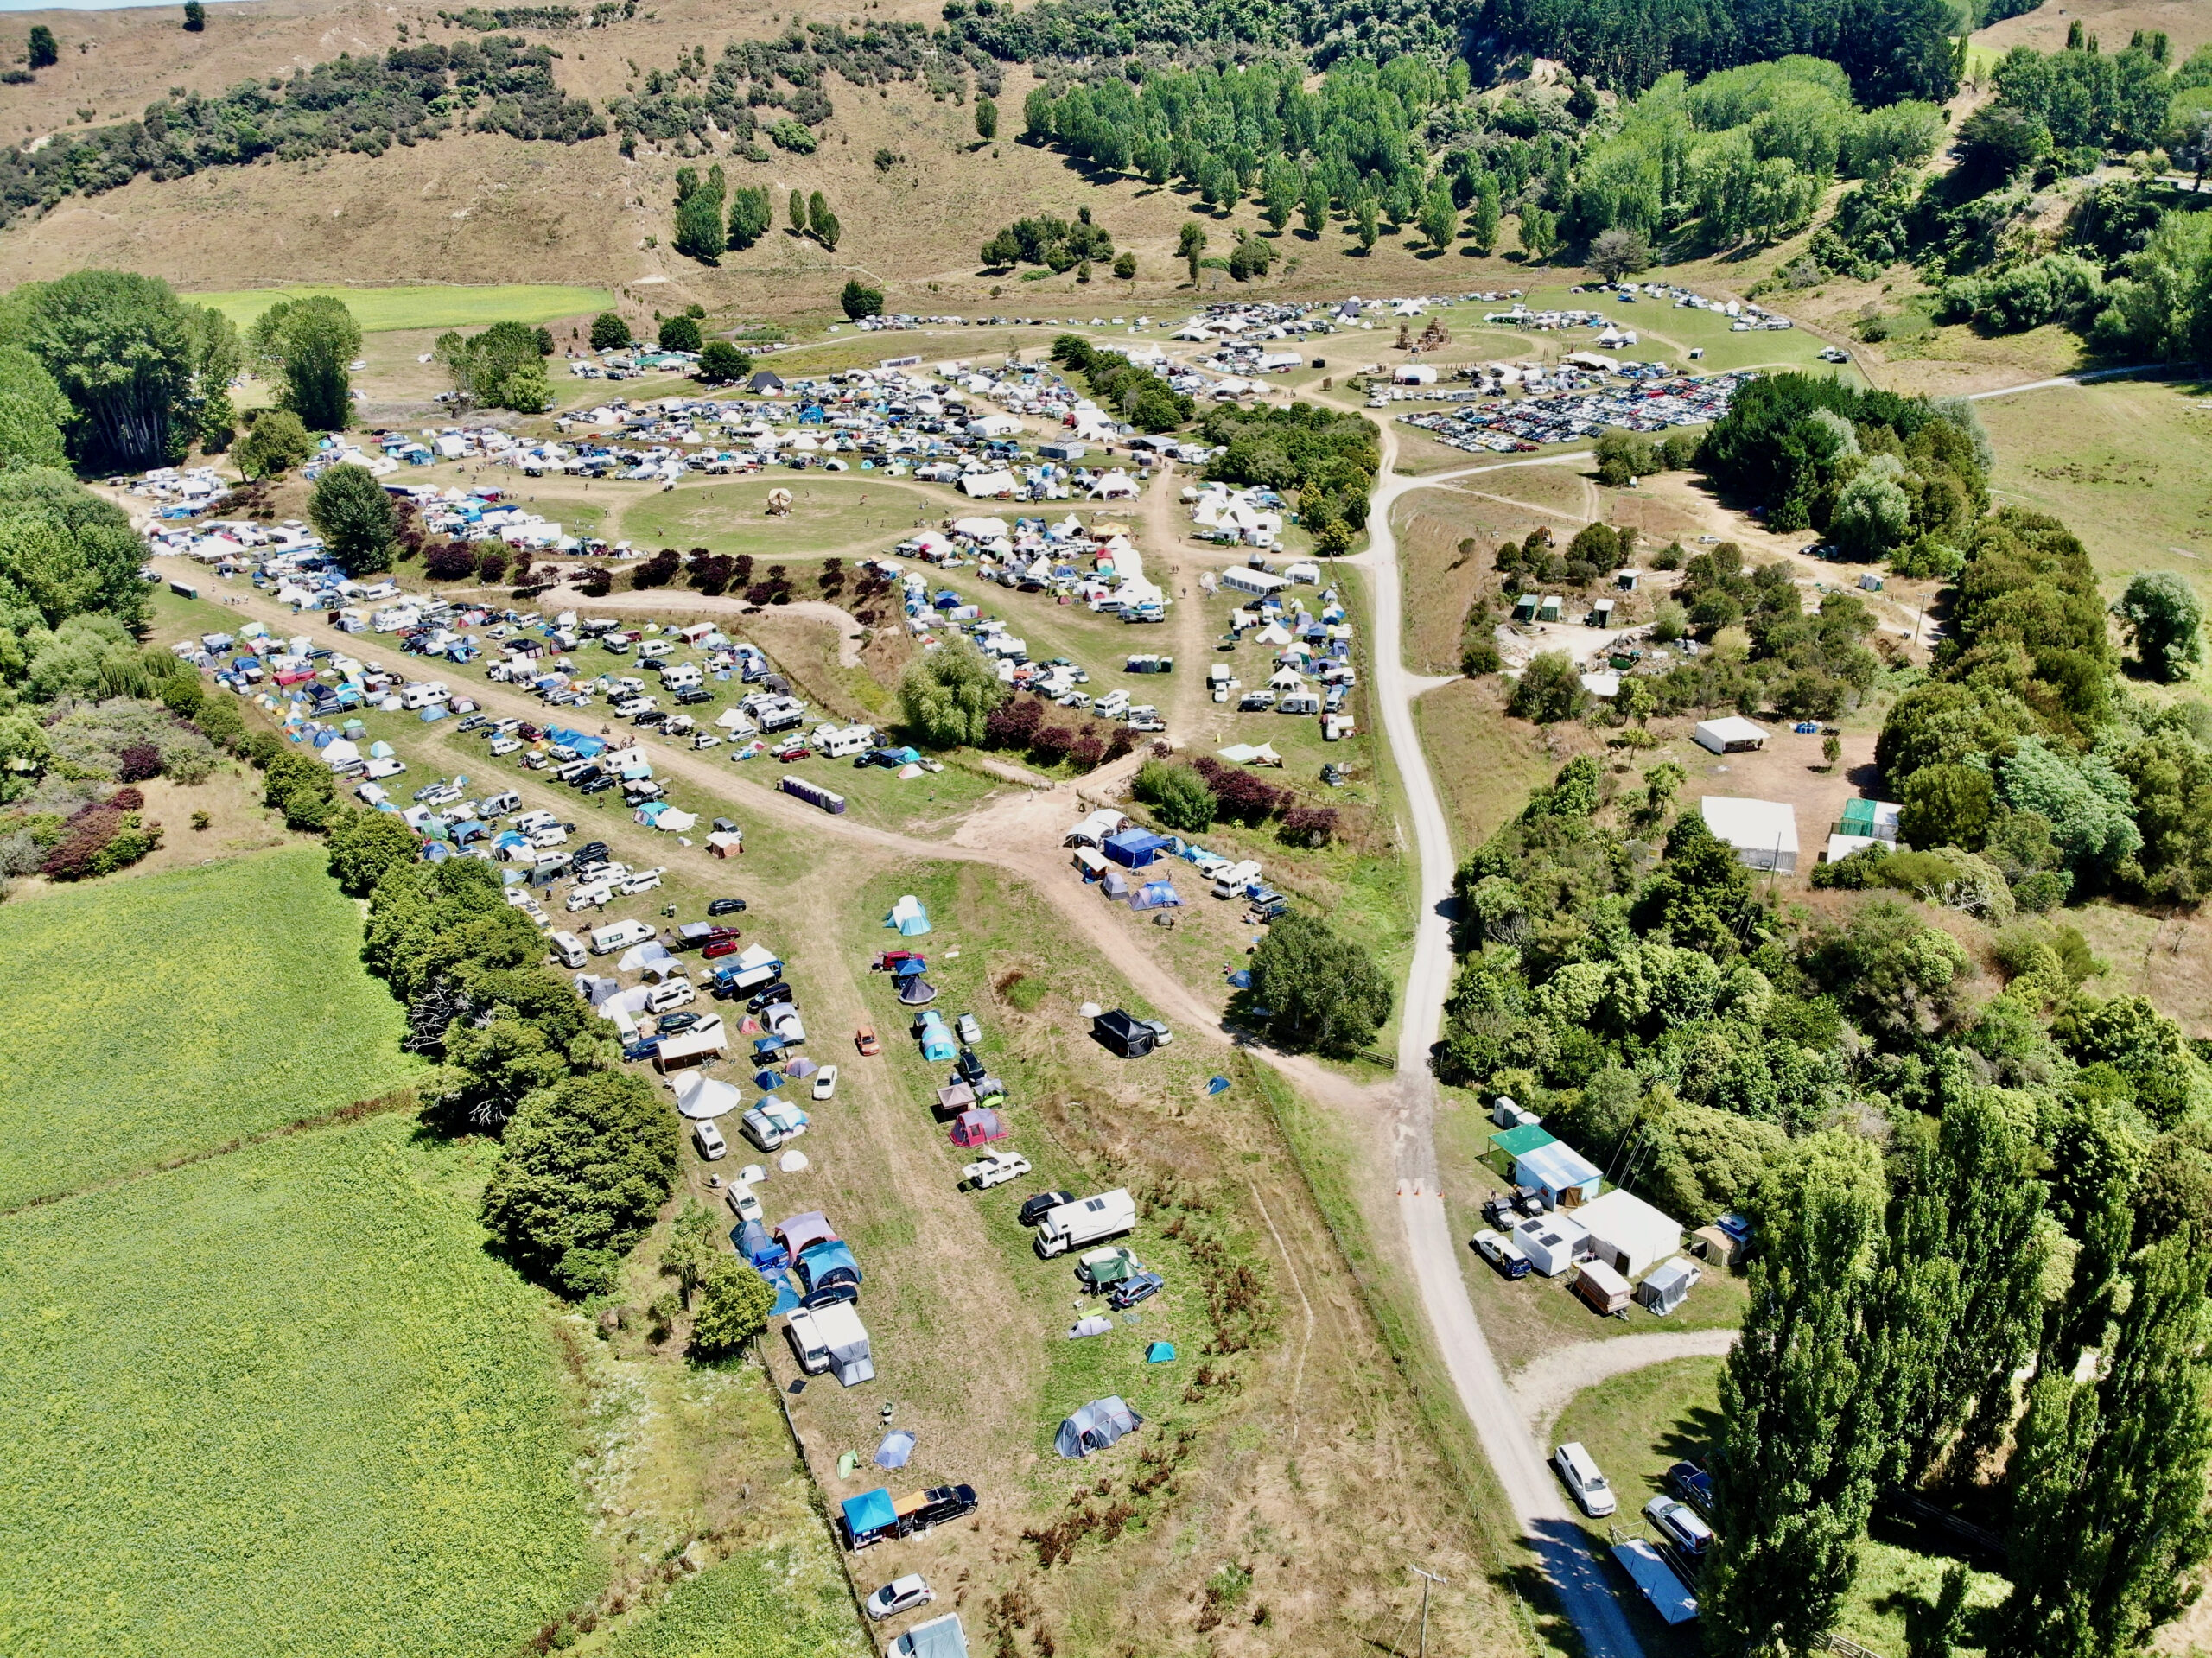 a drone shot of the KB site showing hundreds of tiny tents and campers, sprawling roads, a small effigy and temple, and lush green trees